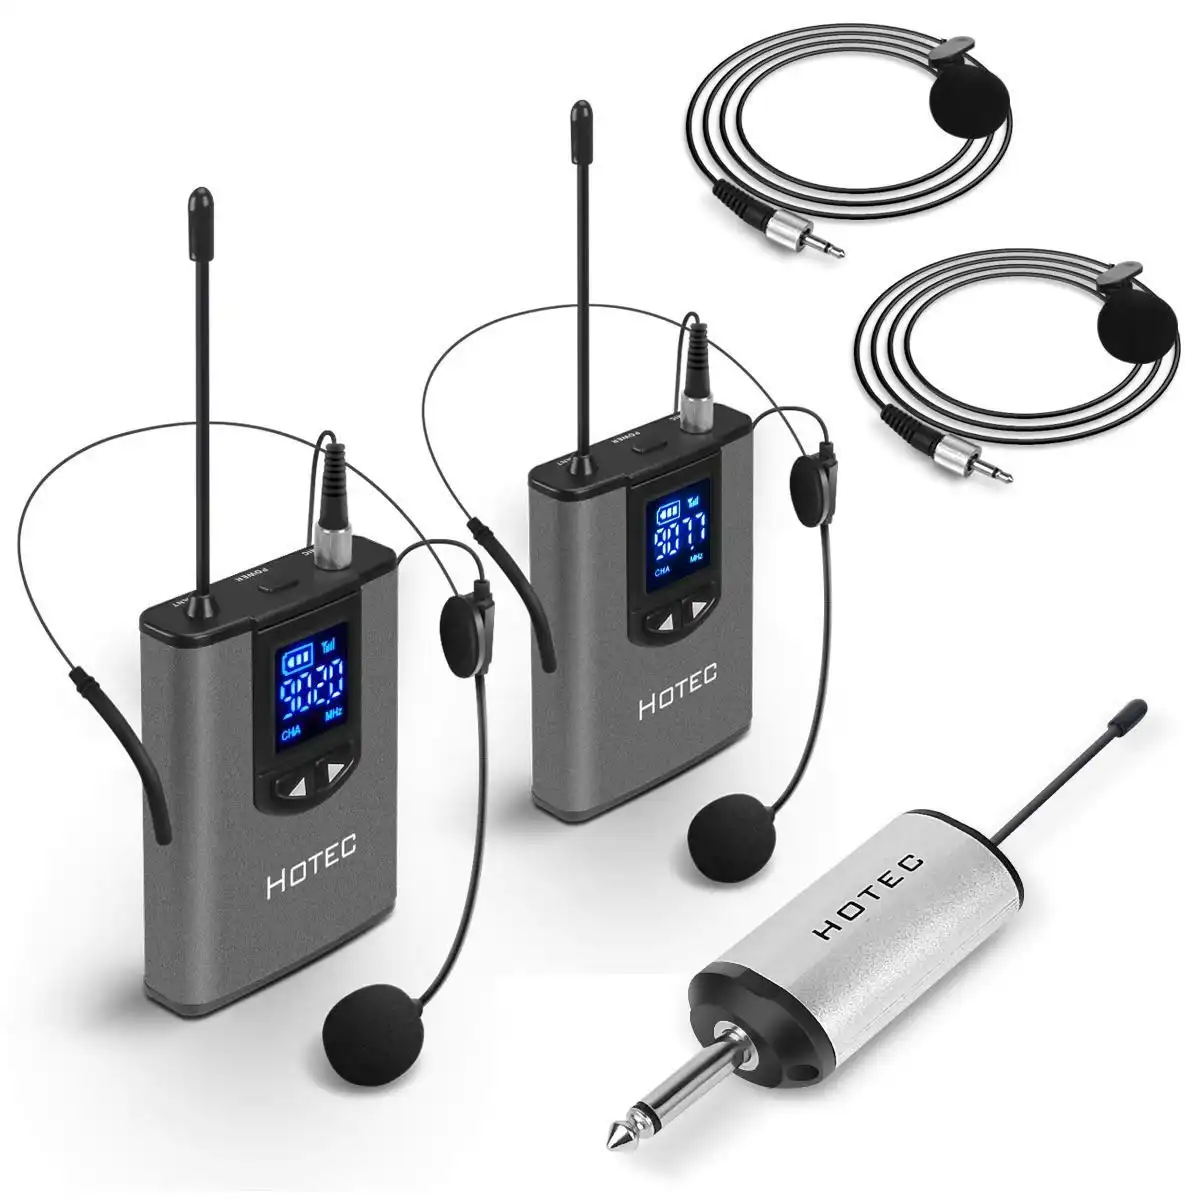 Hotec Dual Wireless Lapel/Lavalier Microphone and Headset Microphone System with Mini Rechargeable Receiver, For Recording and Live Performances (H-U2